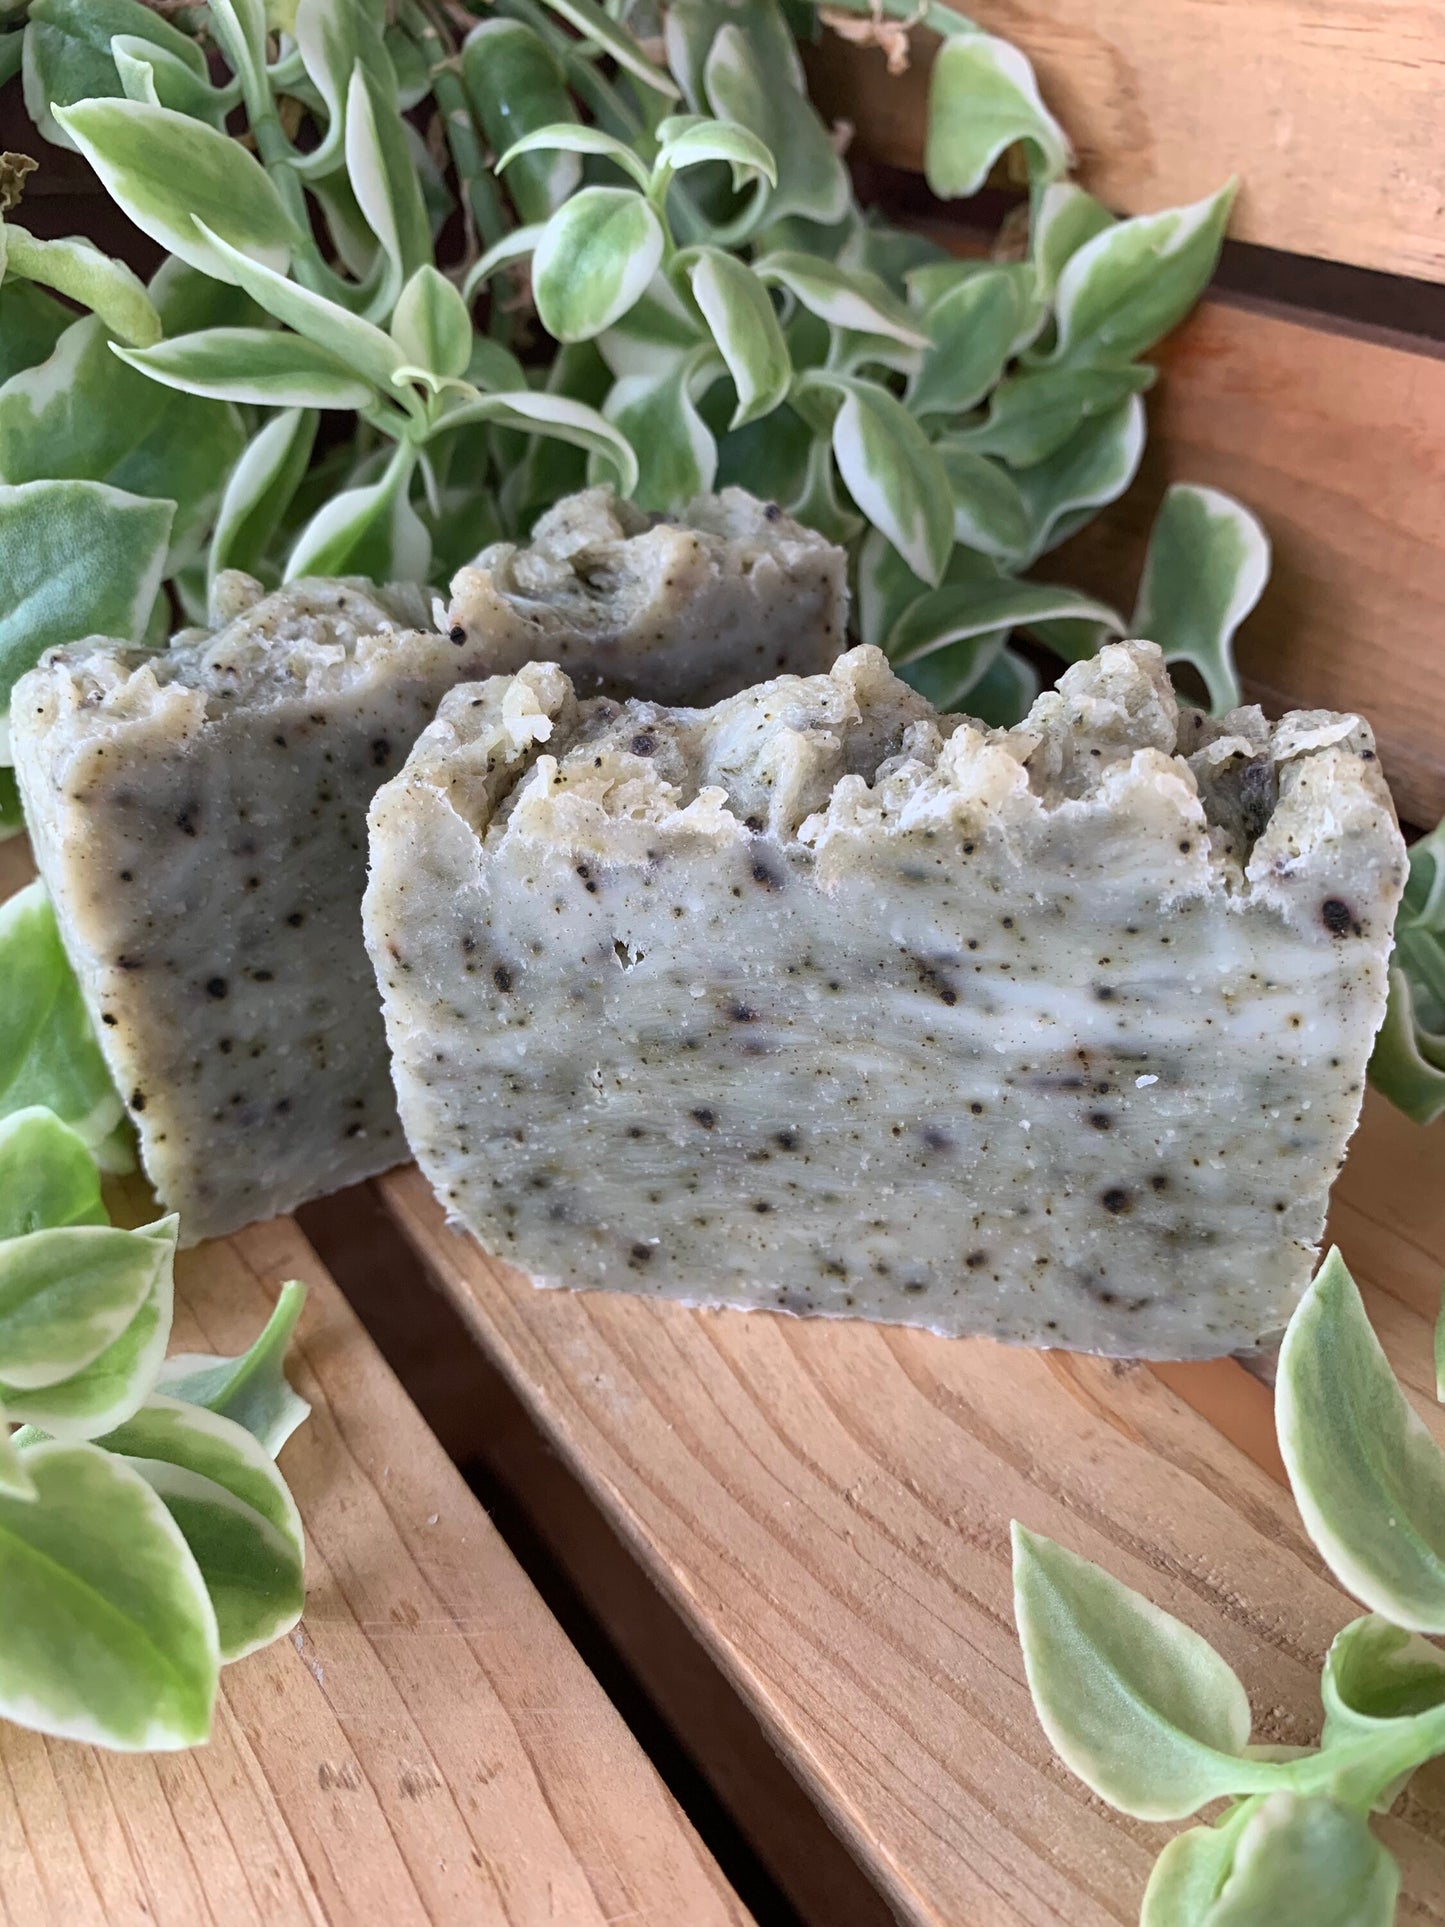 Patchouli Frankincense Cedarwood Soap- Happy Hippie Soap- Patchouli Soap- Made with Beeswax and Honey Soap - Palm Free Soap